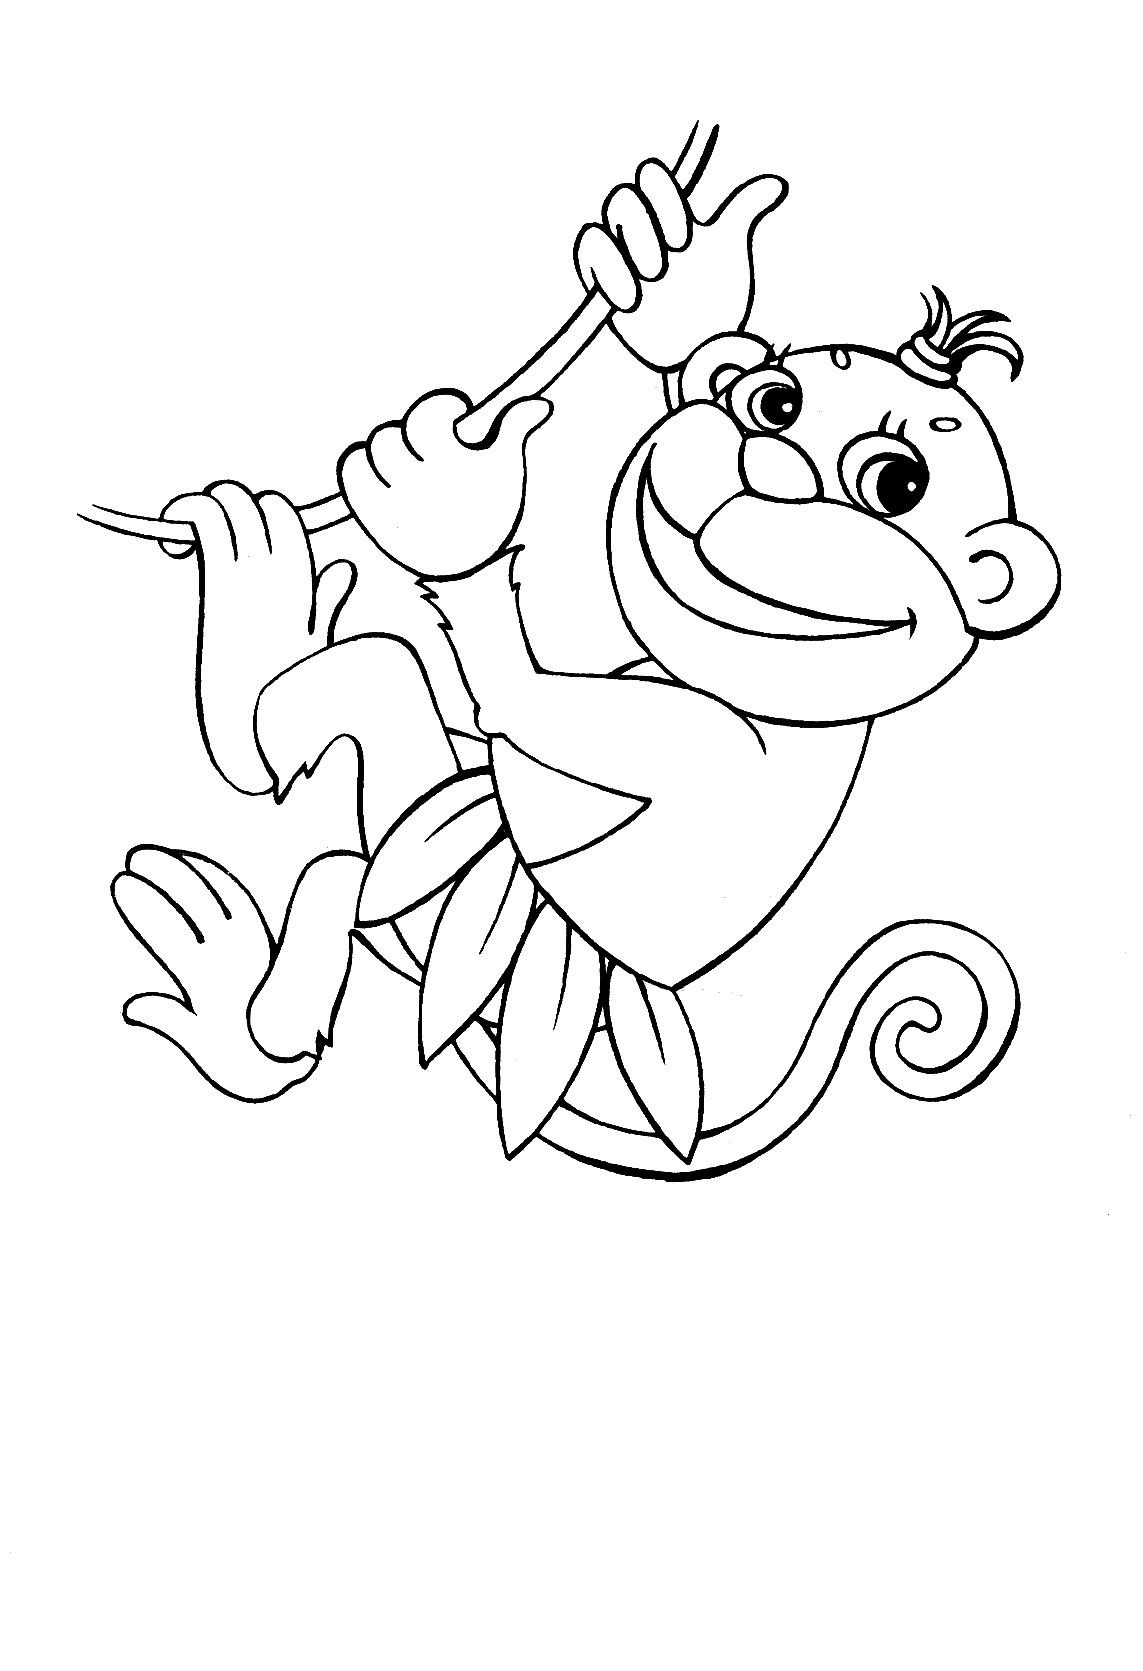 coloring page monkey coloring pages for kids coloring page monkey 